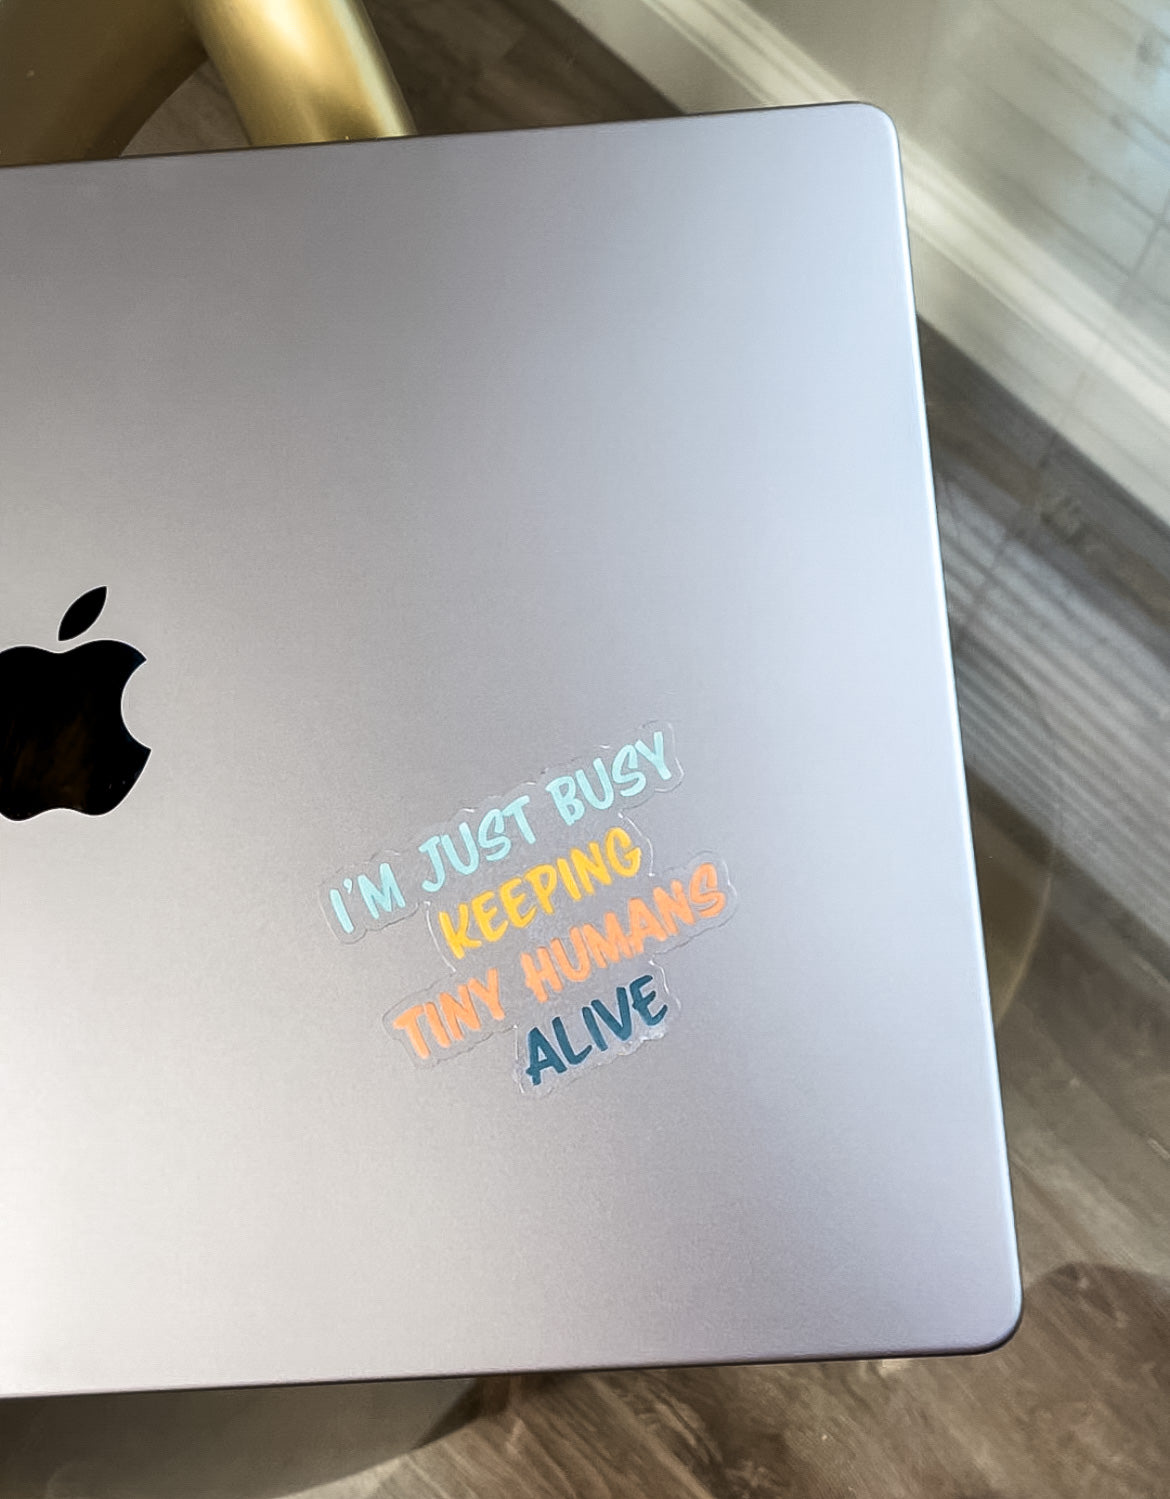 I'm just busy keeping tiny humans alive clear sticker pictured on laptop